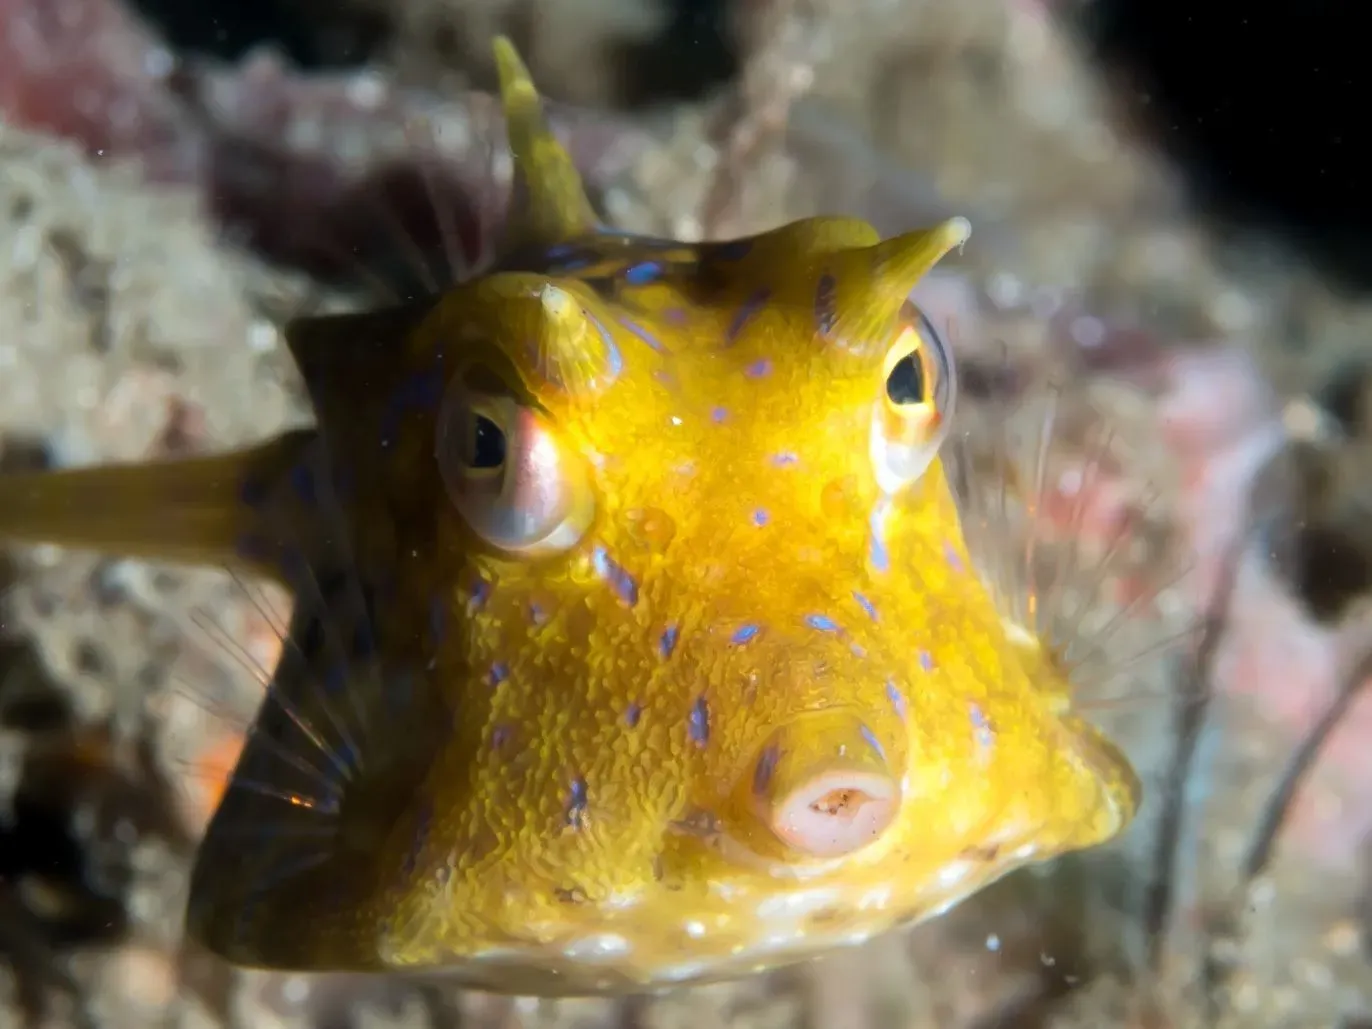 The thornback cowfish is a coastal fish with a boxy shape, unusual patterns, protruding lips, and horn-like spines.